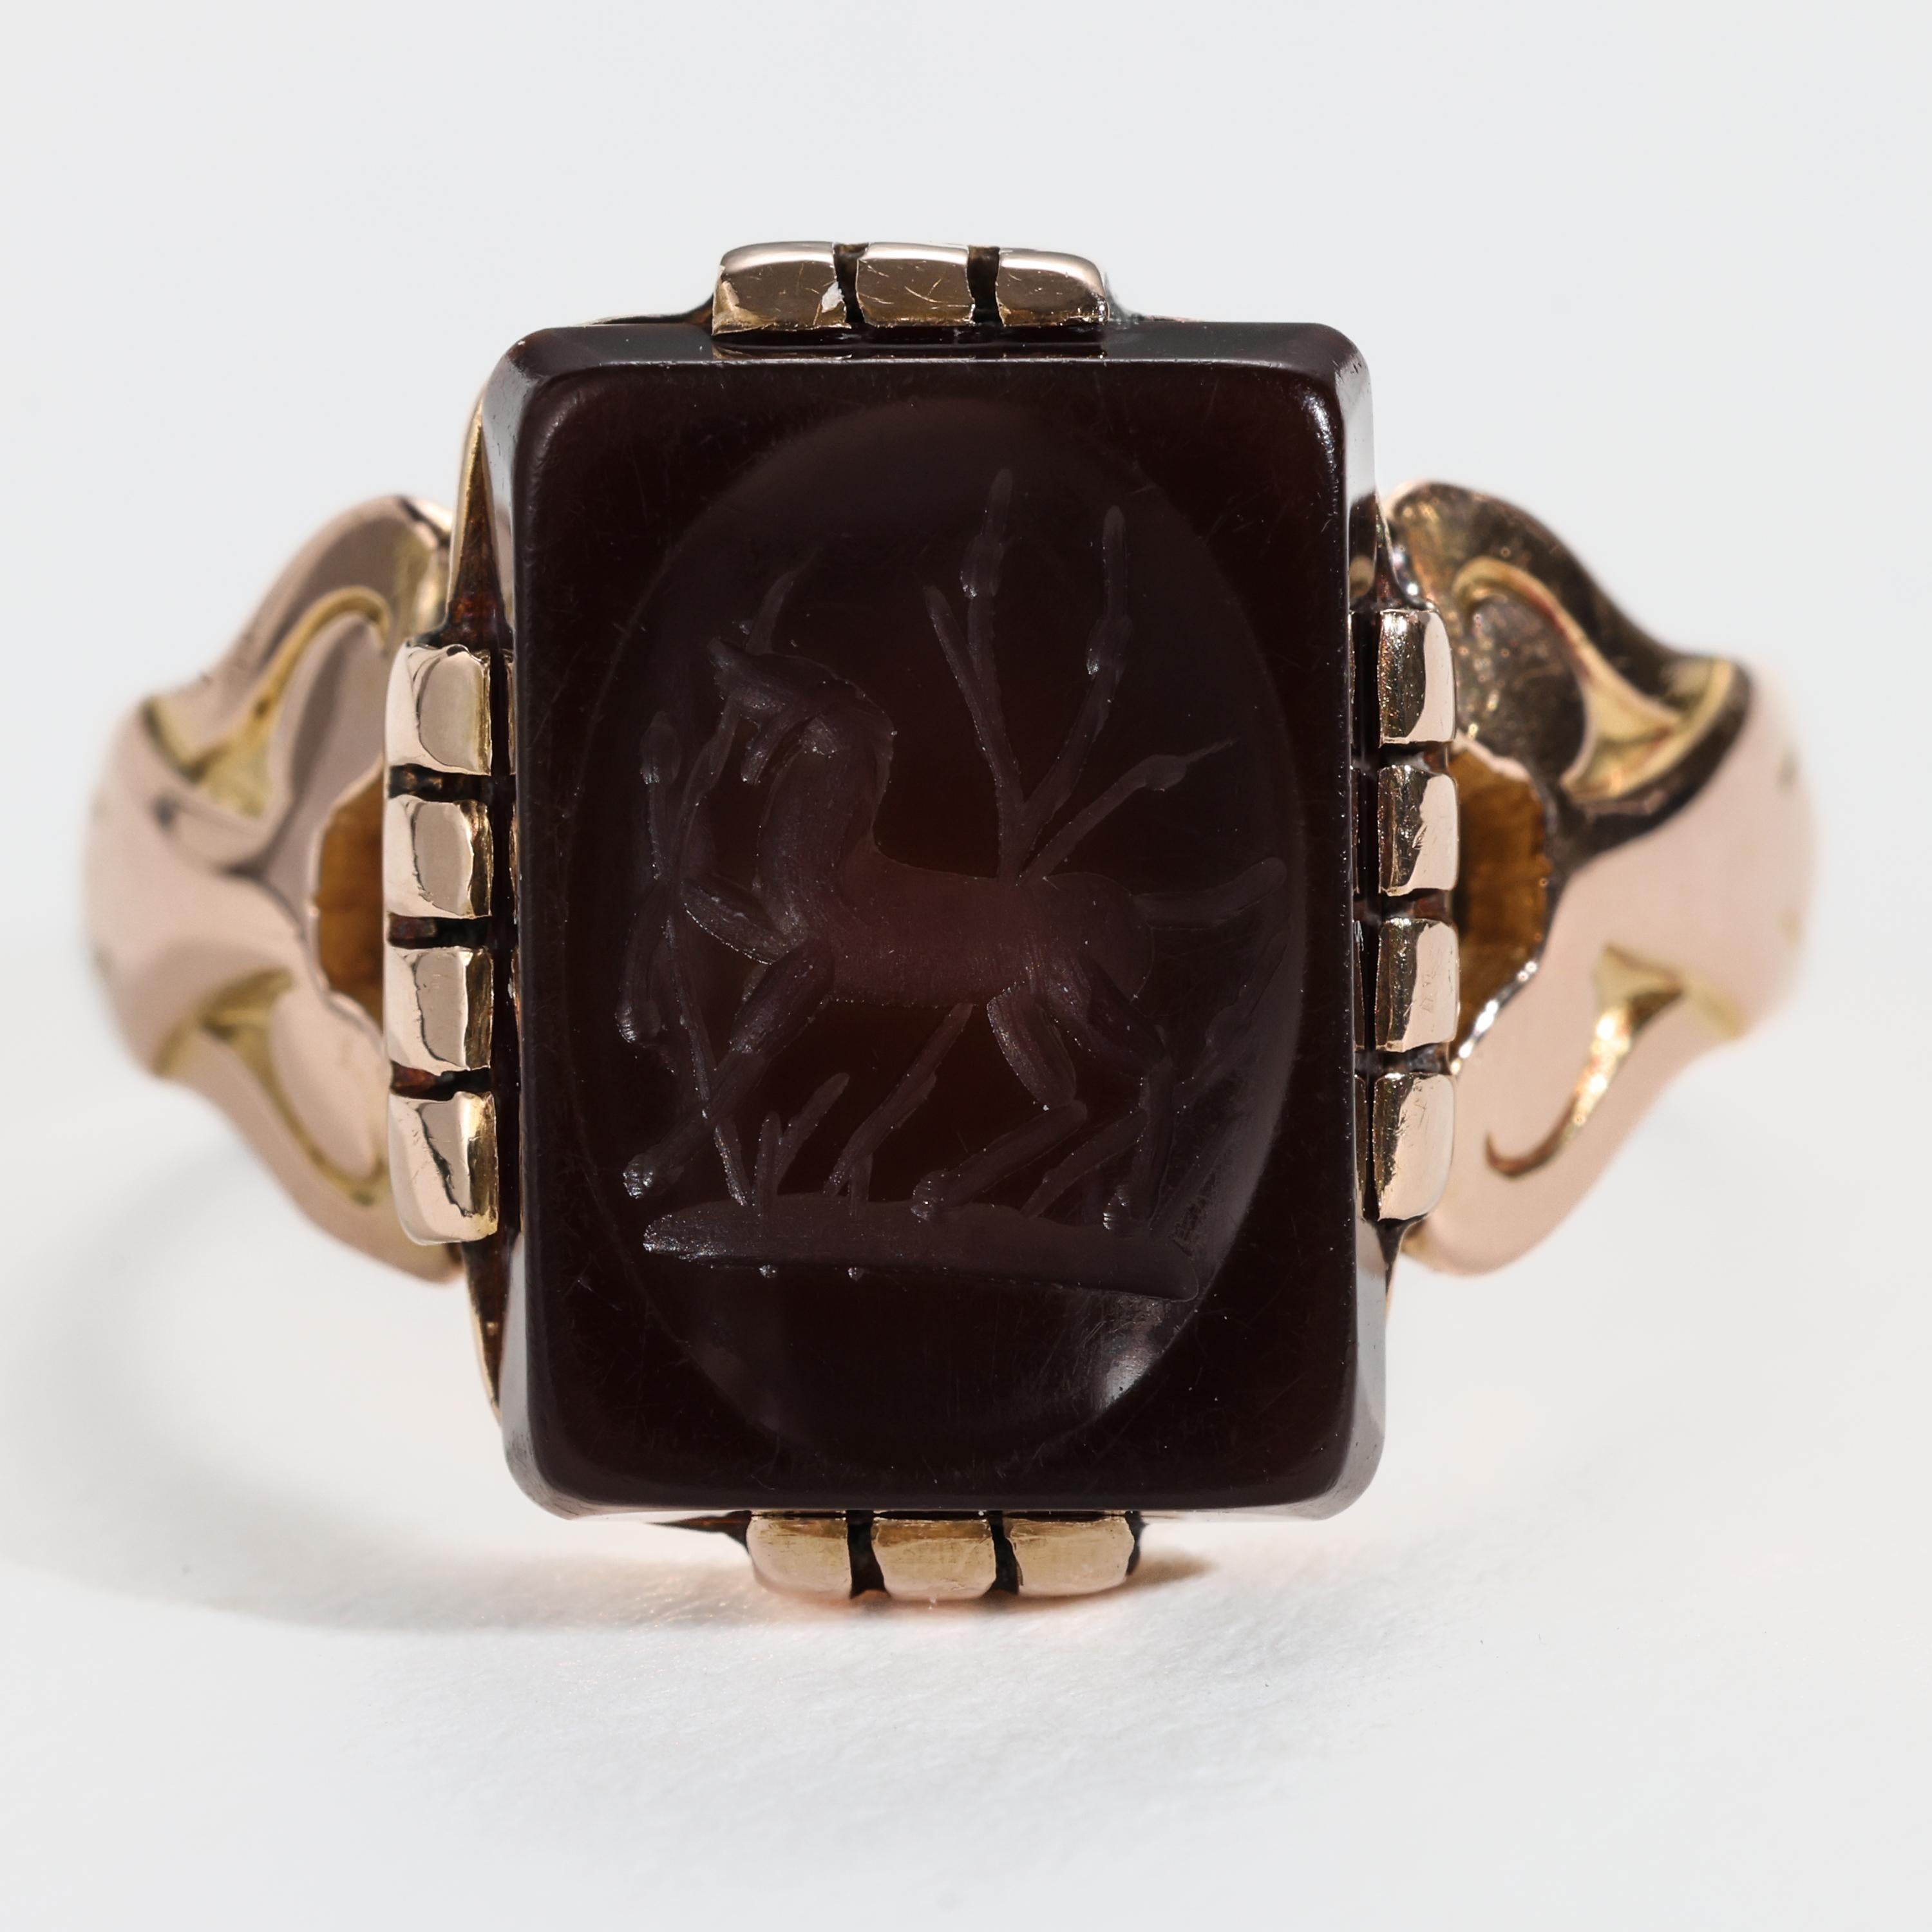 This late Georgian / early Victorian 18K rose gold ring holds a rectangular-cut deep brown sardonyx gemstone that has been artfully carved -or etched, rather- to depict a horse trotting among the tall grass. Rendered with superb artistry and skill,